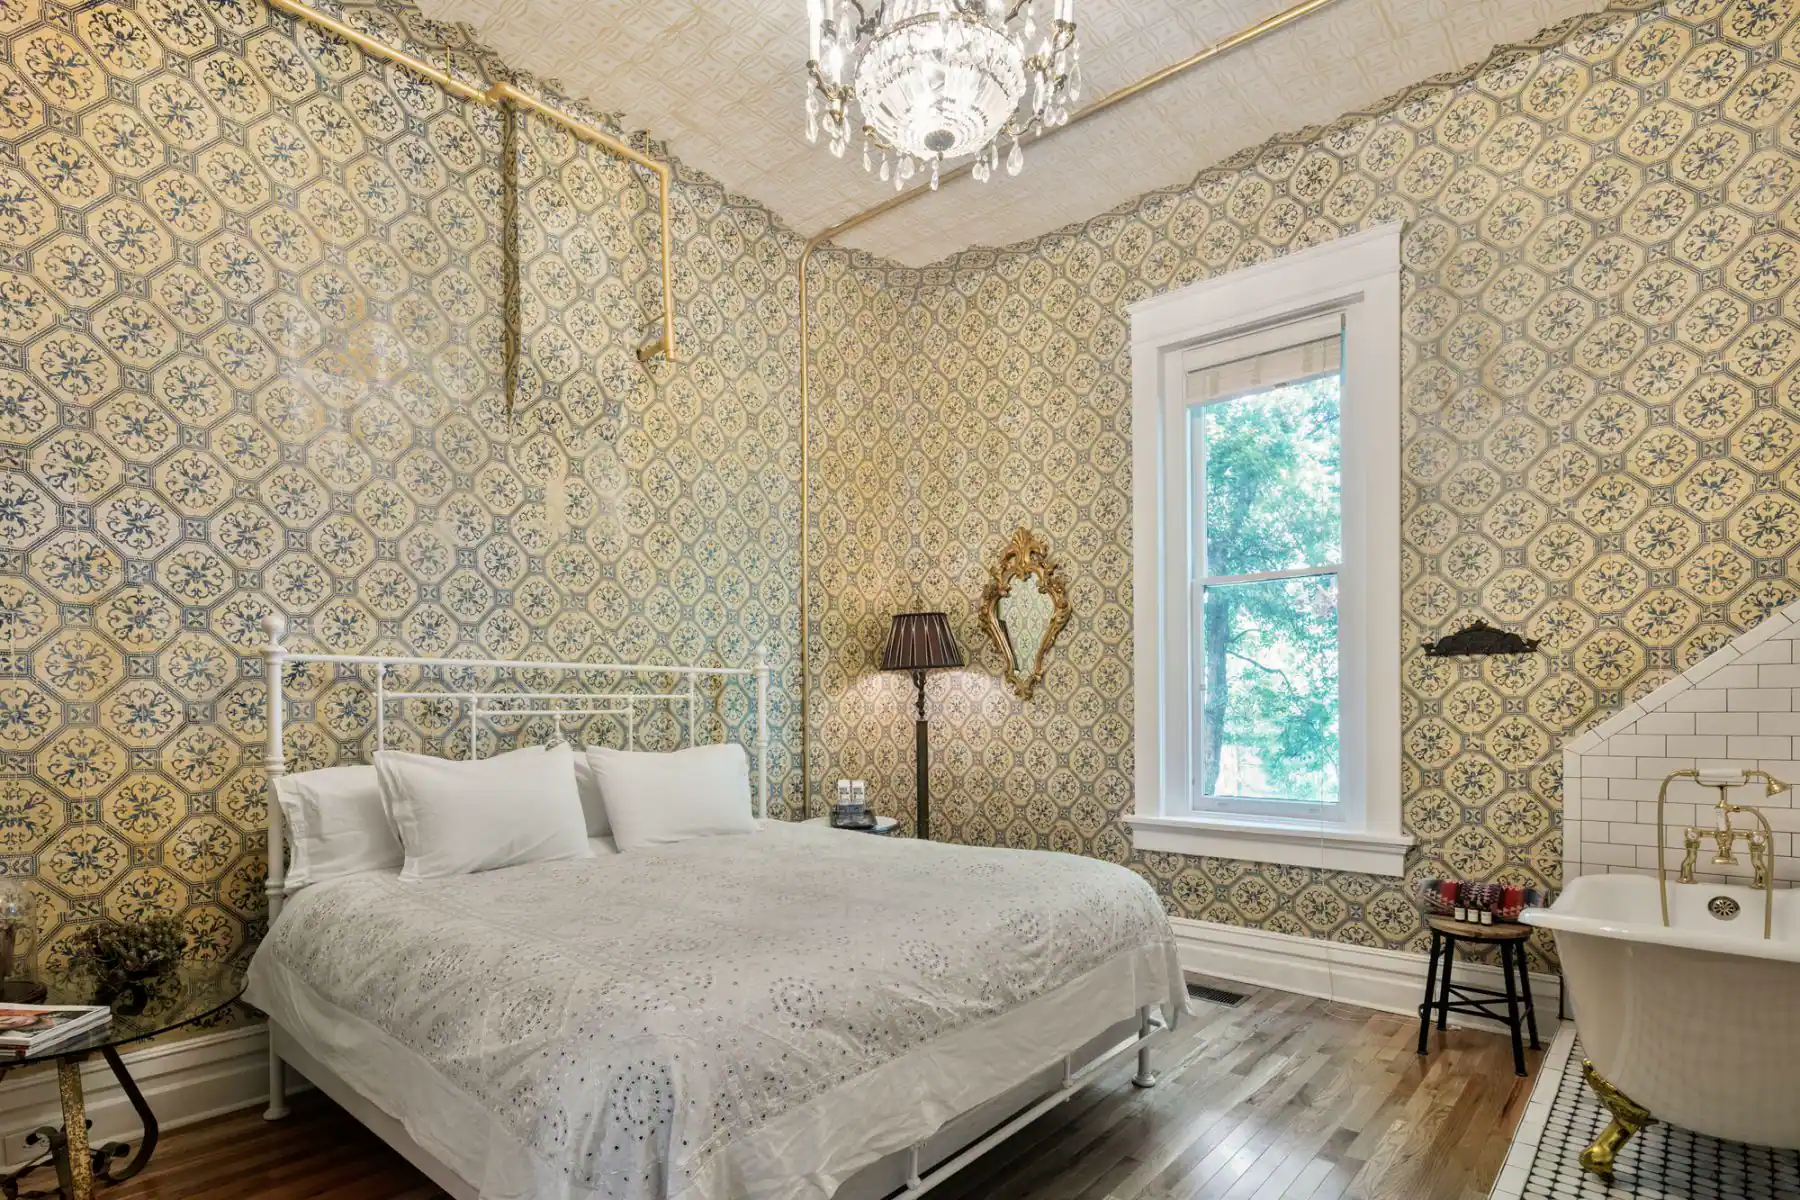 The Victorian Room inside Urban Cowboy Nashville. A king sized bed is placed in the middle, just across from a tiled area holding a claw foot bathtub. The walls are tiled with detail and a chandelier lamp gives a warm light